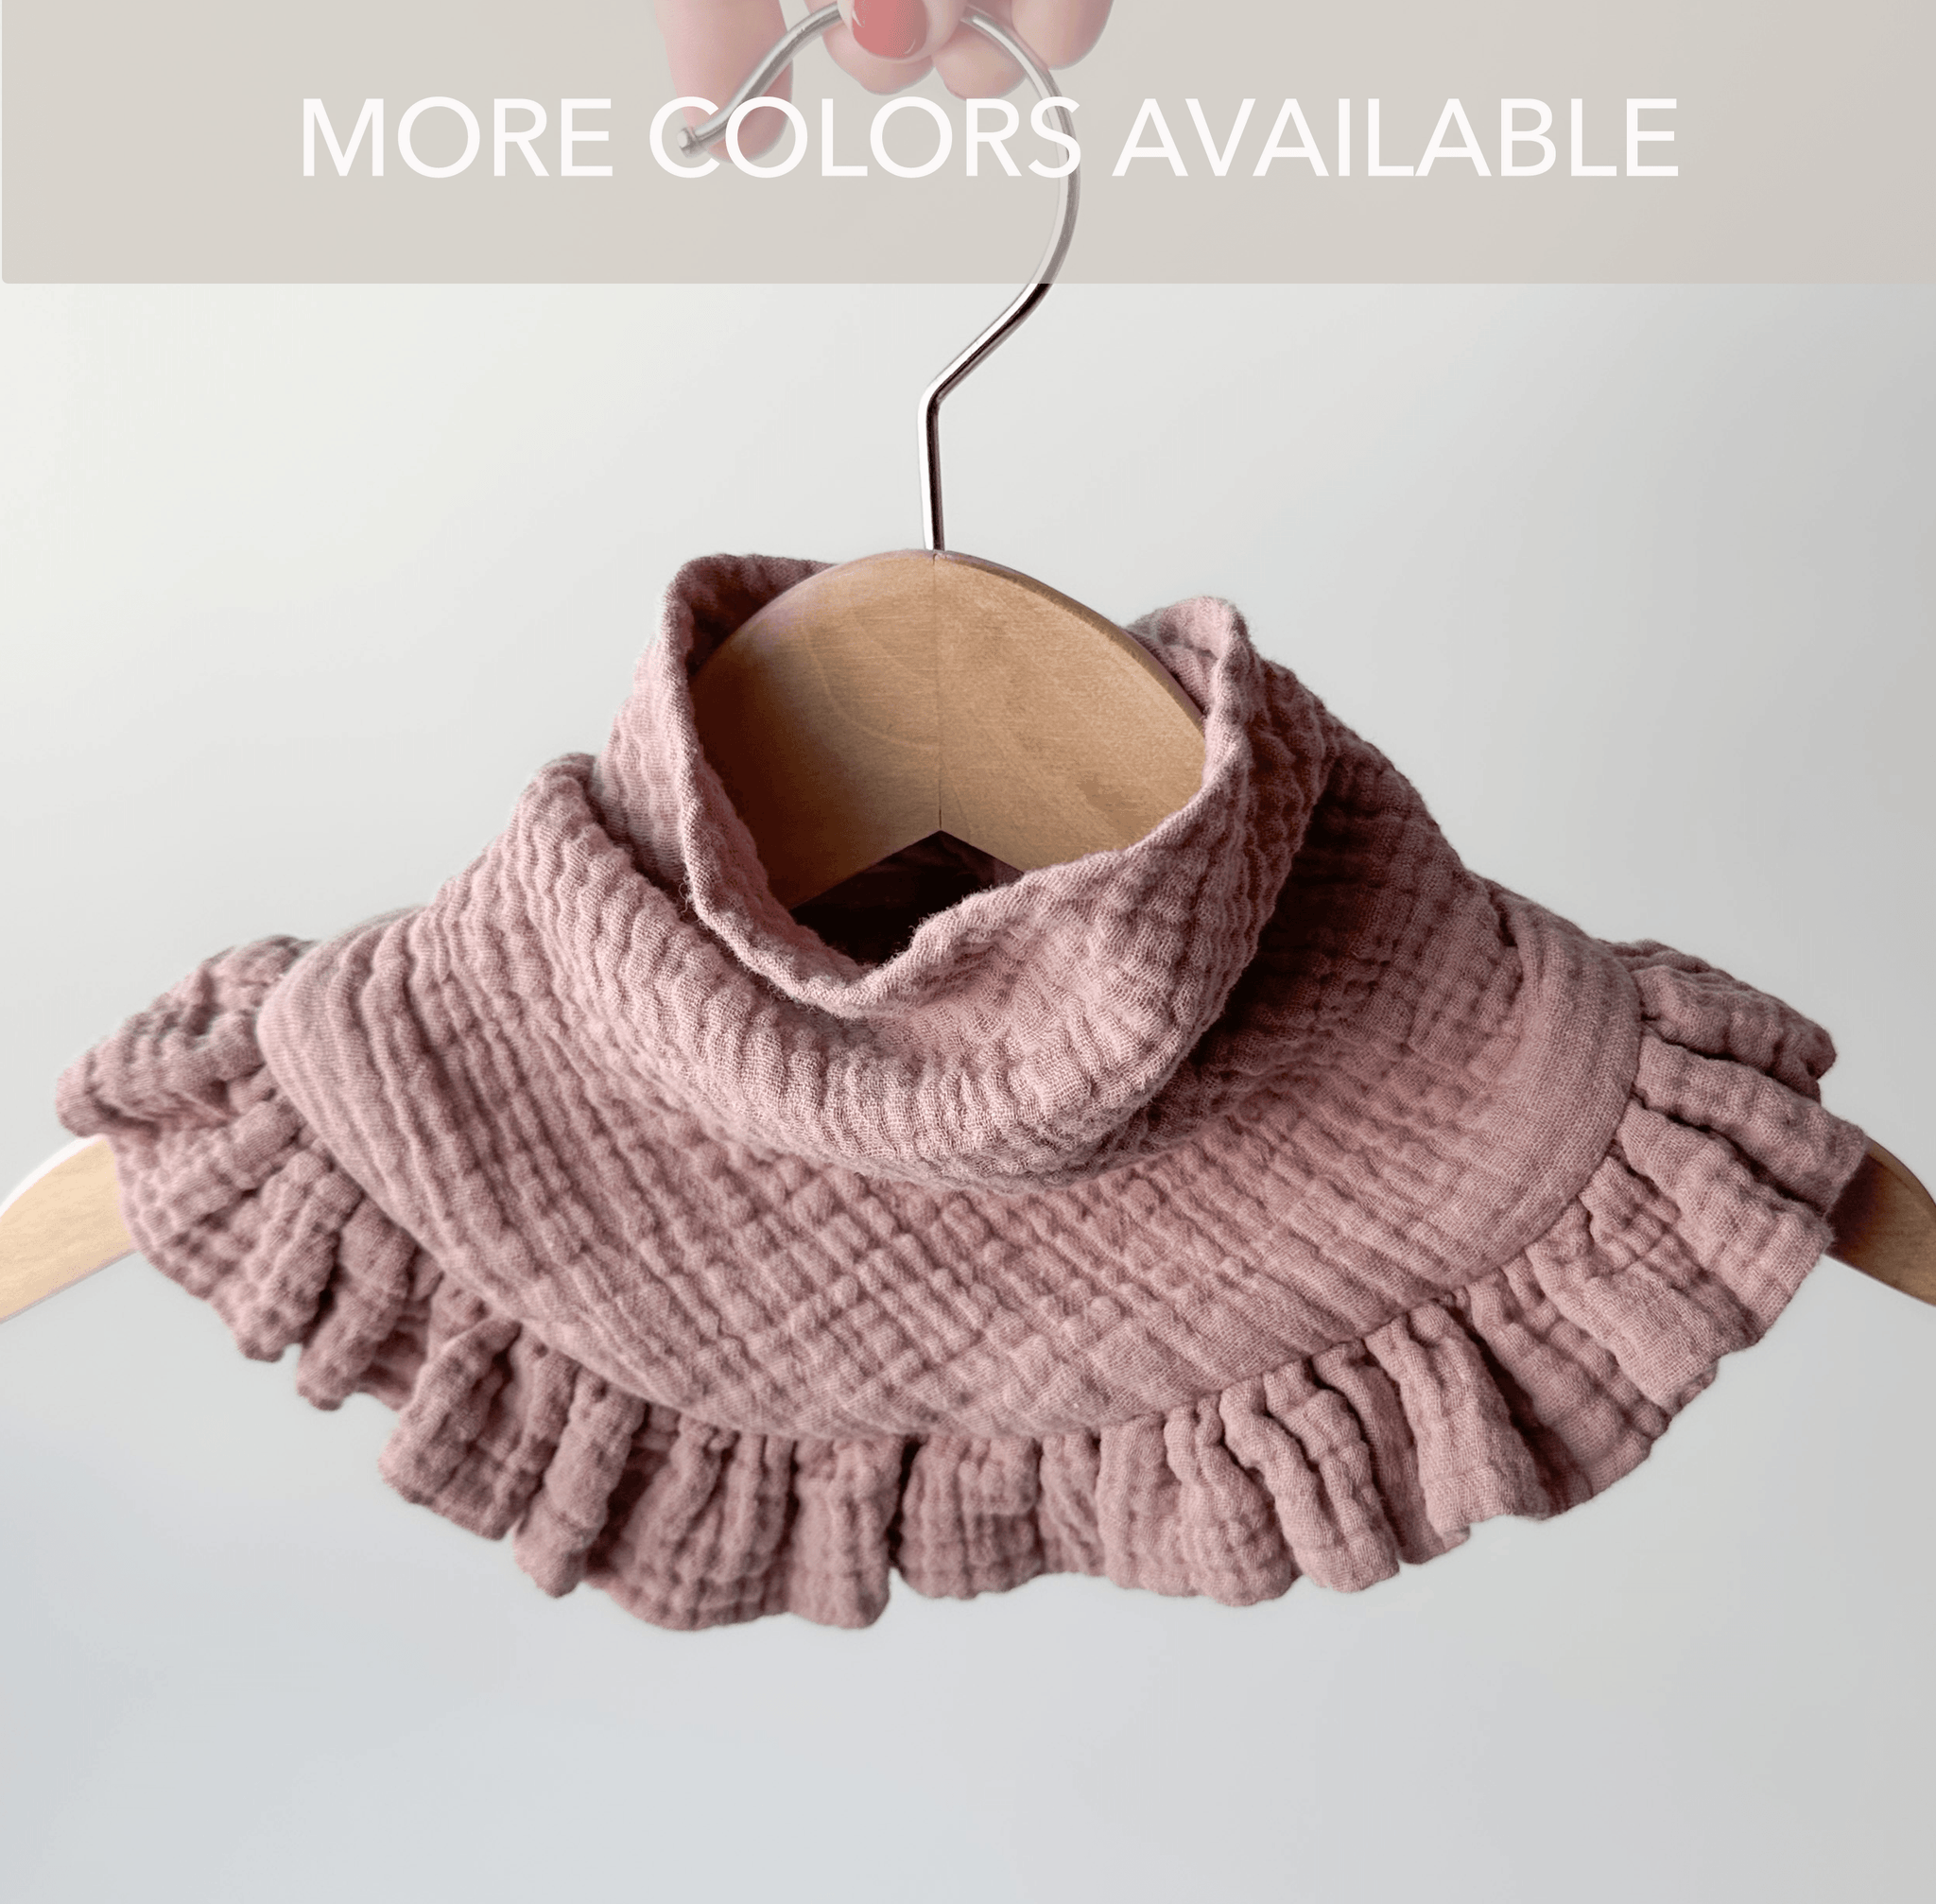 The Ruffle Bib / Many Colors Available - Charley Charles